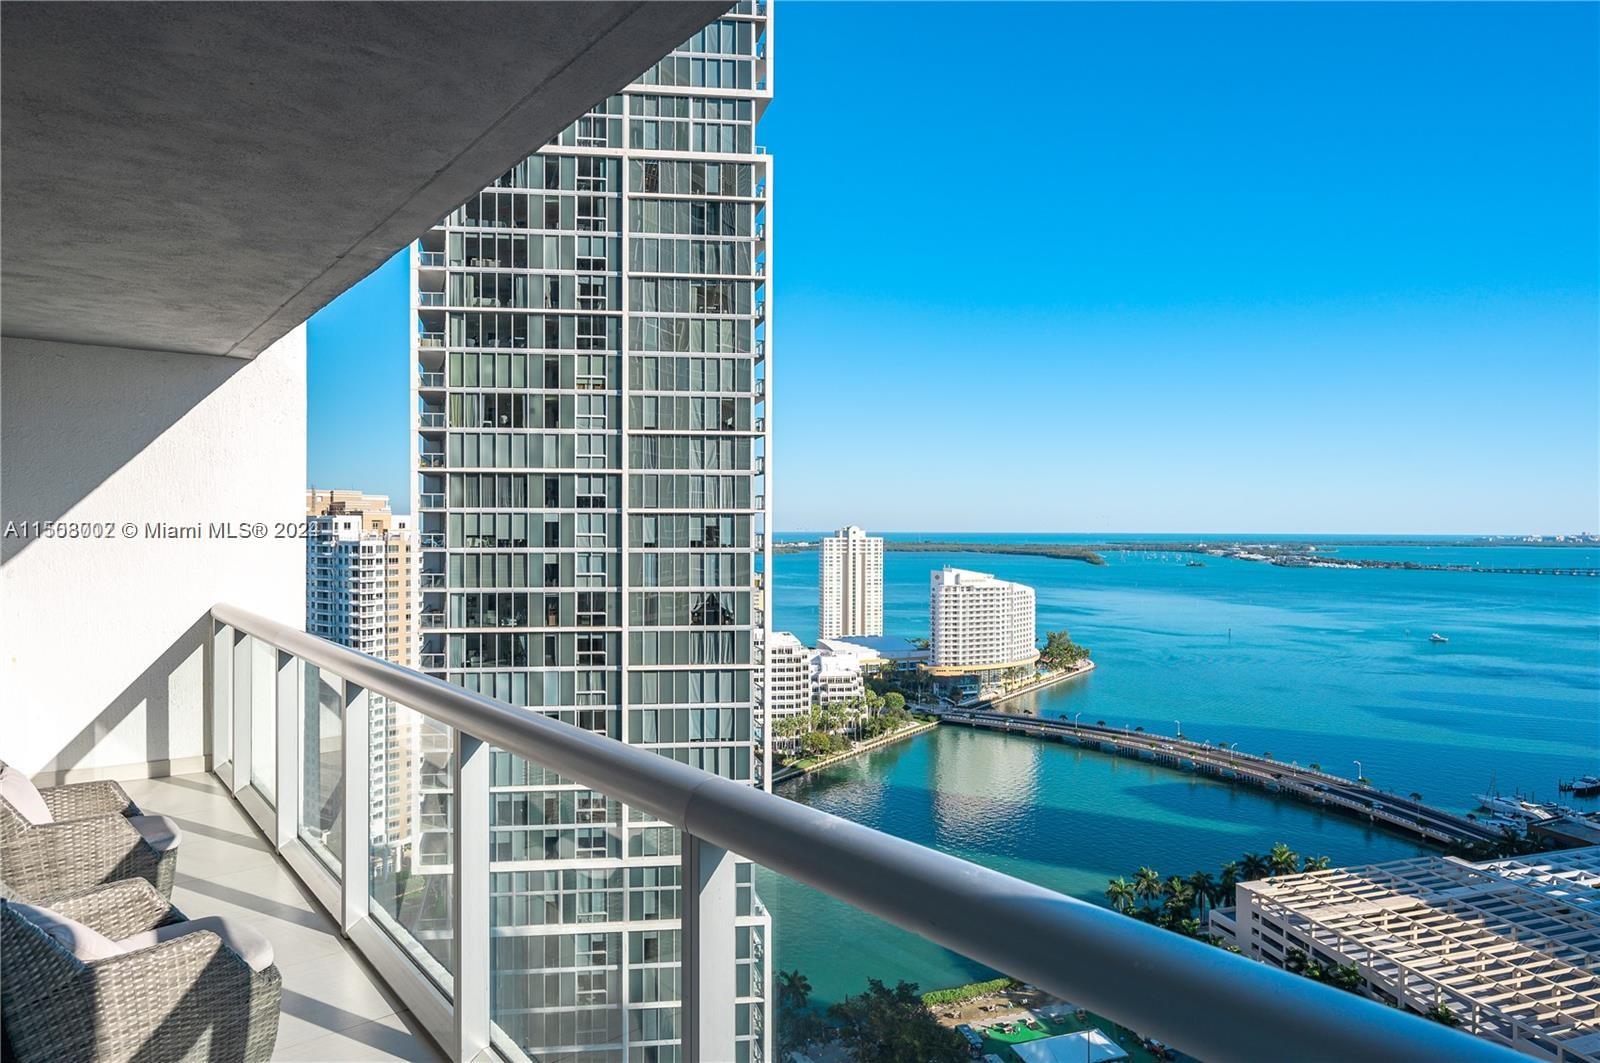 Significantly Lowest Priced 2-bedroom at The Icon. Located on the 31st floor, boasting exceptional City & Water Views. Discover your newest investment property/vacation unit, in the heart of Brickell. State of the art Amenities, such as the Spa, Olympic sized Pool, Gym, and Fine Dining. CASH BUYERS ONLY